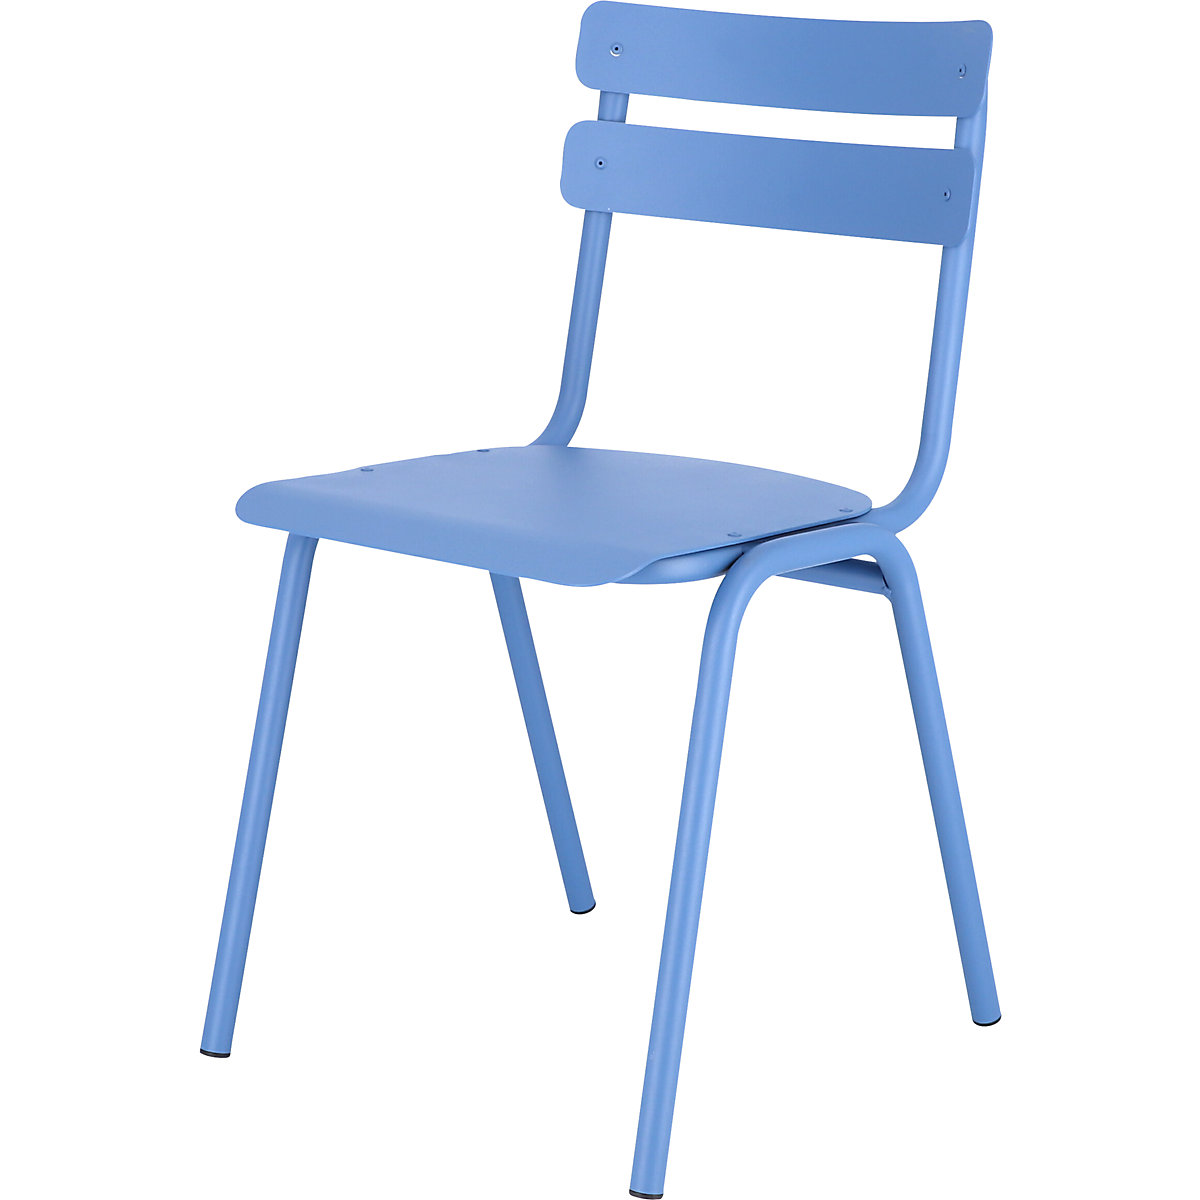 ONE outdoor chair